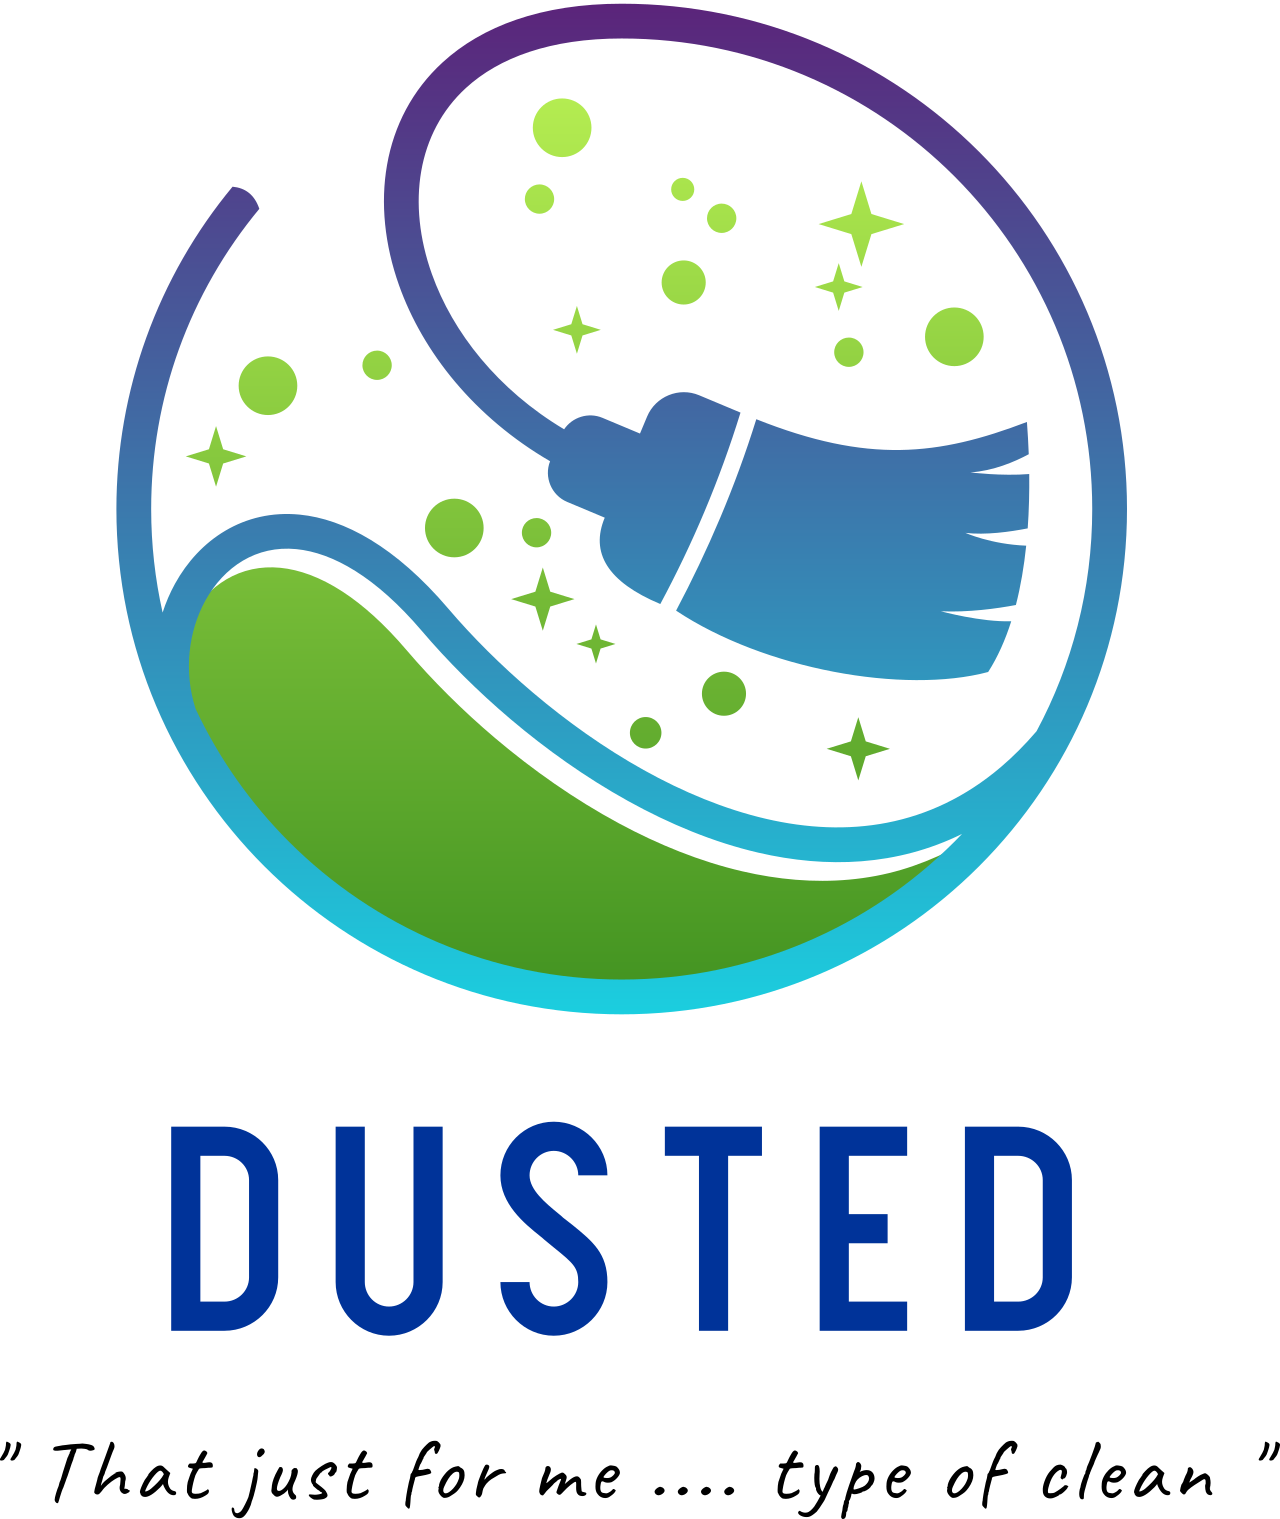 dusted's logo